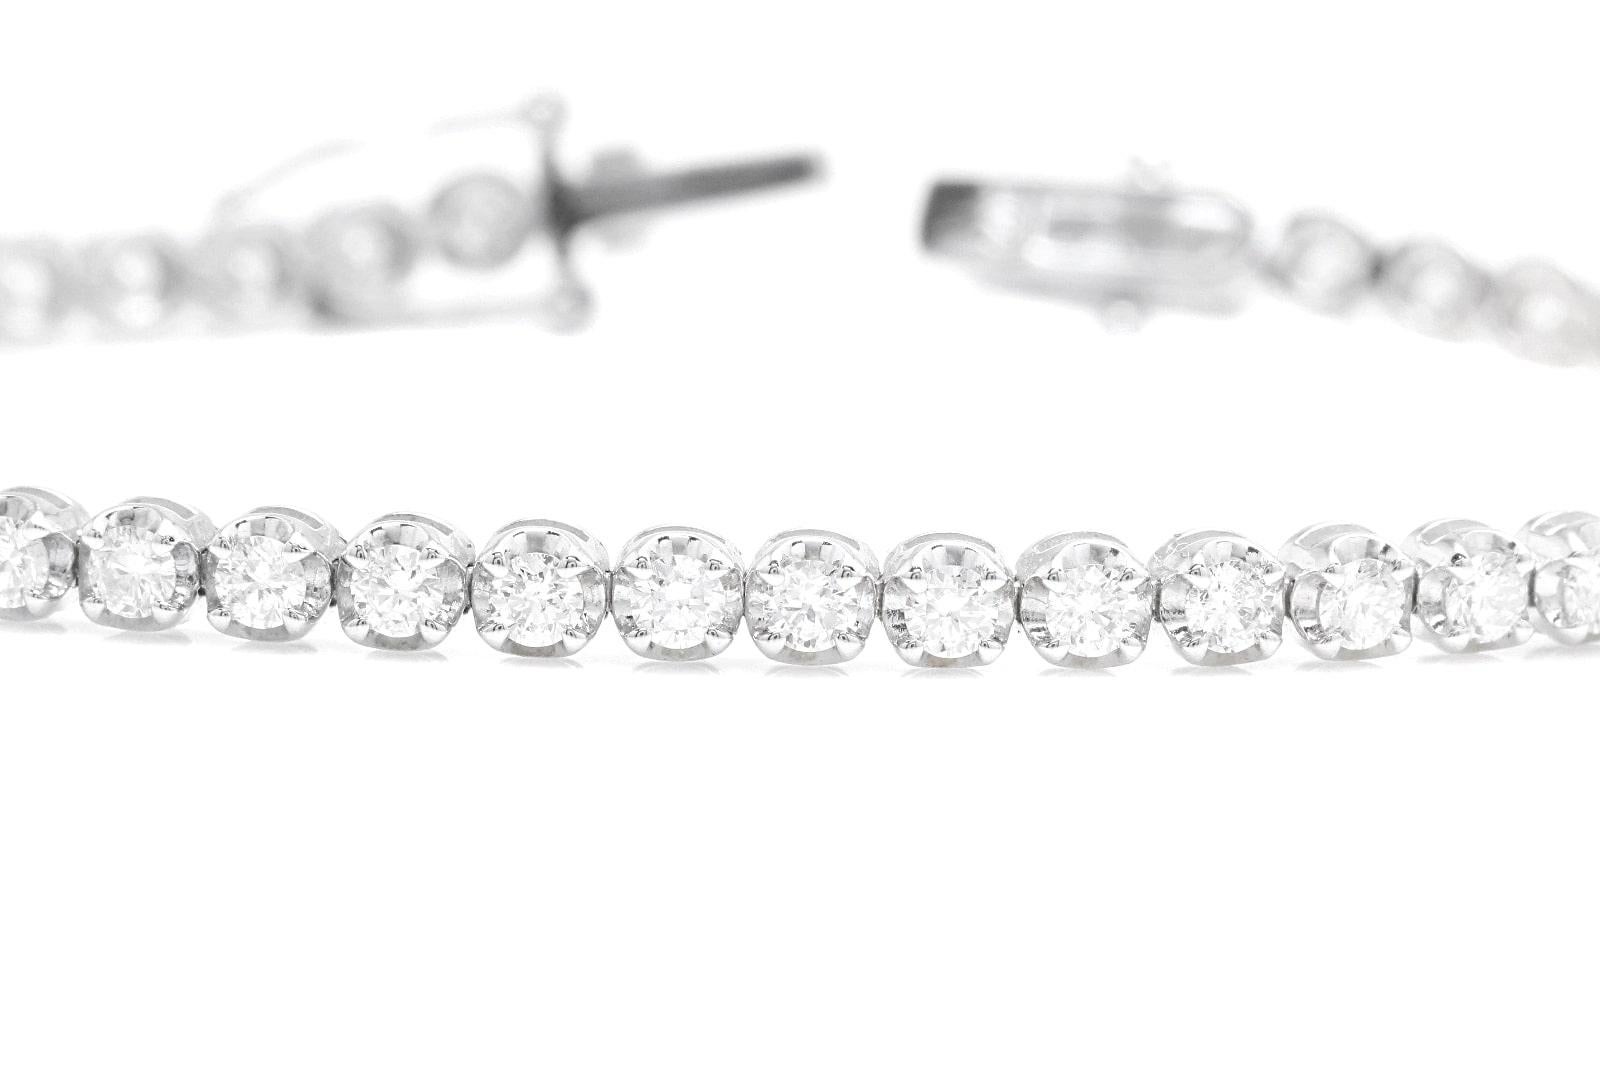 2.50 Carats Stunning Natural Diamond 14K Solid White Gold Bracelet 

Suggested Replacement Value: Approx. $6,000.00

STAMPED: 14K

Total Natural Round Diamonds Weight: Approx. 2.50 Carats (color G-H / Clarity SI1-SI2)

Bangle Wrist Size is:  7